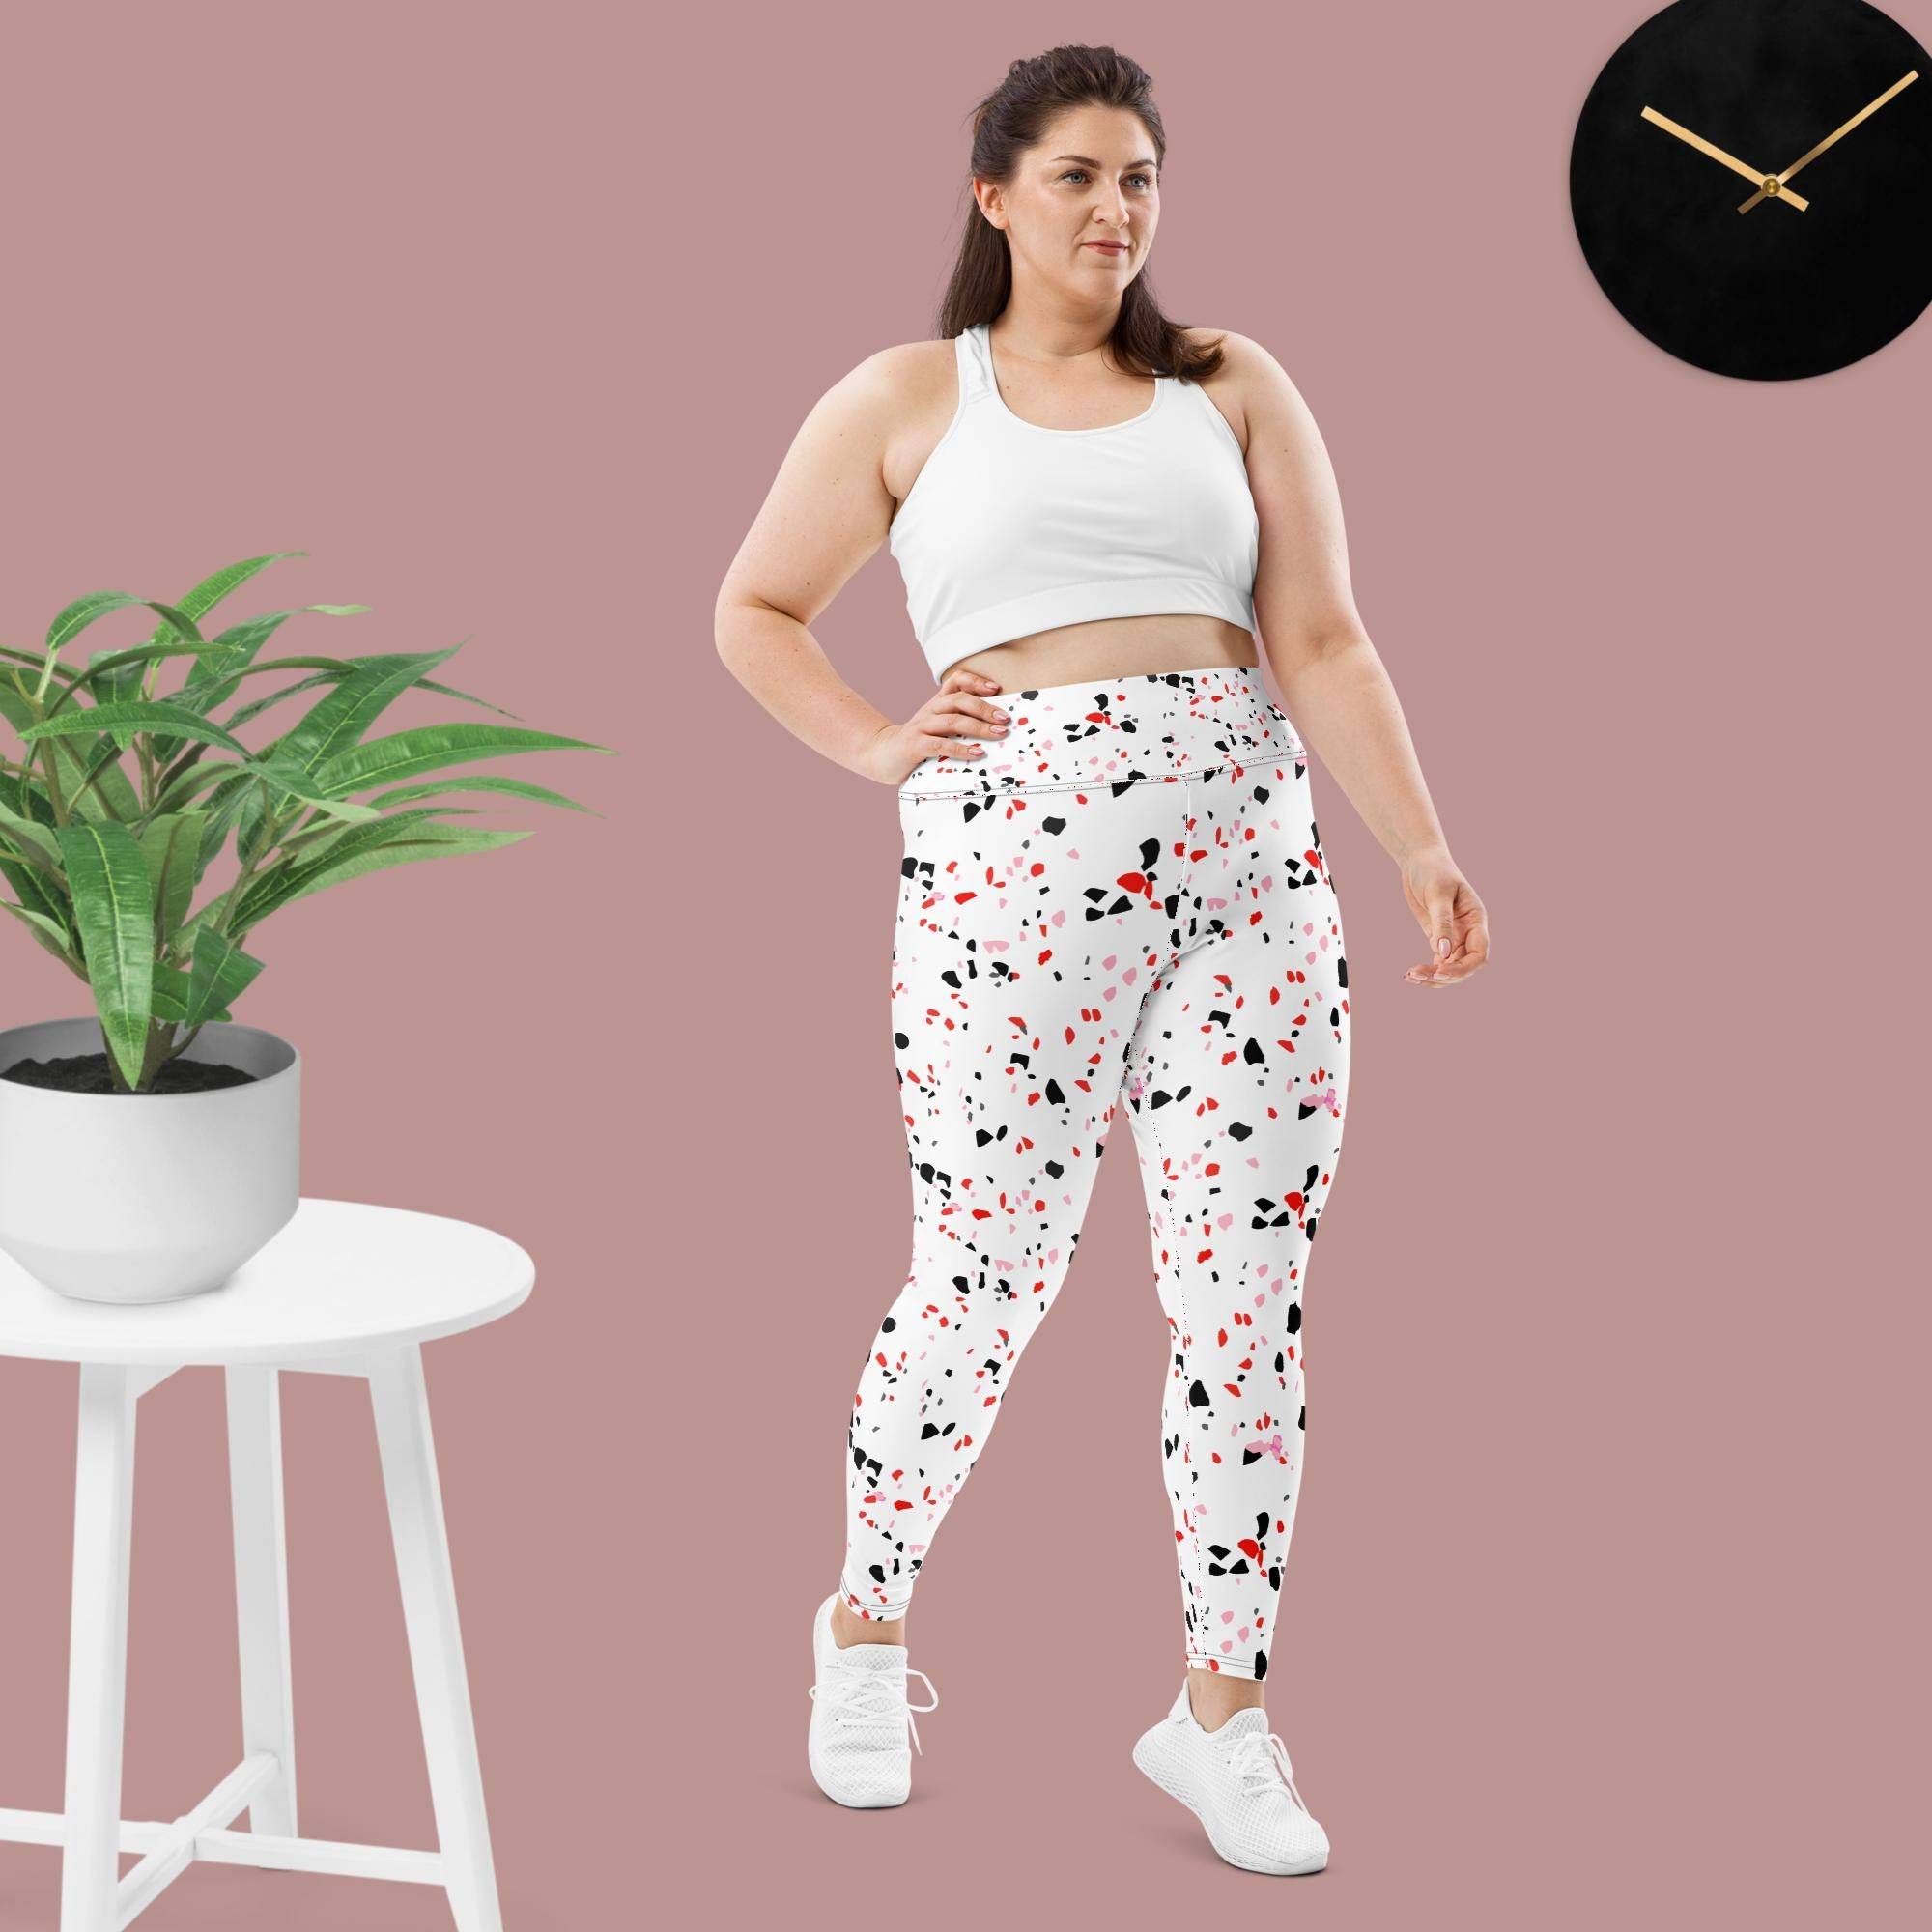 women's plus size leggings with a high waist band to provide support and comfort. 